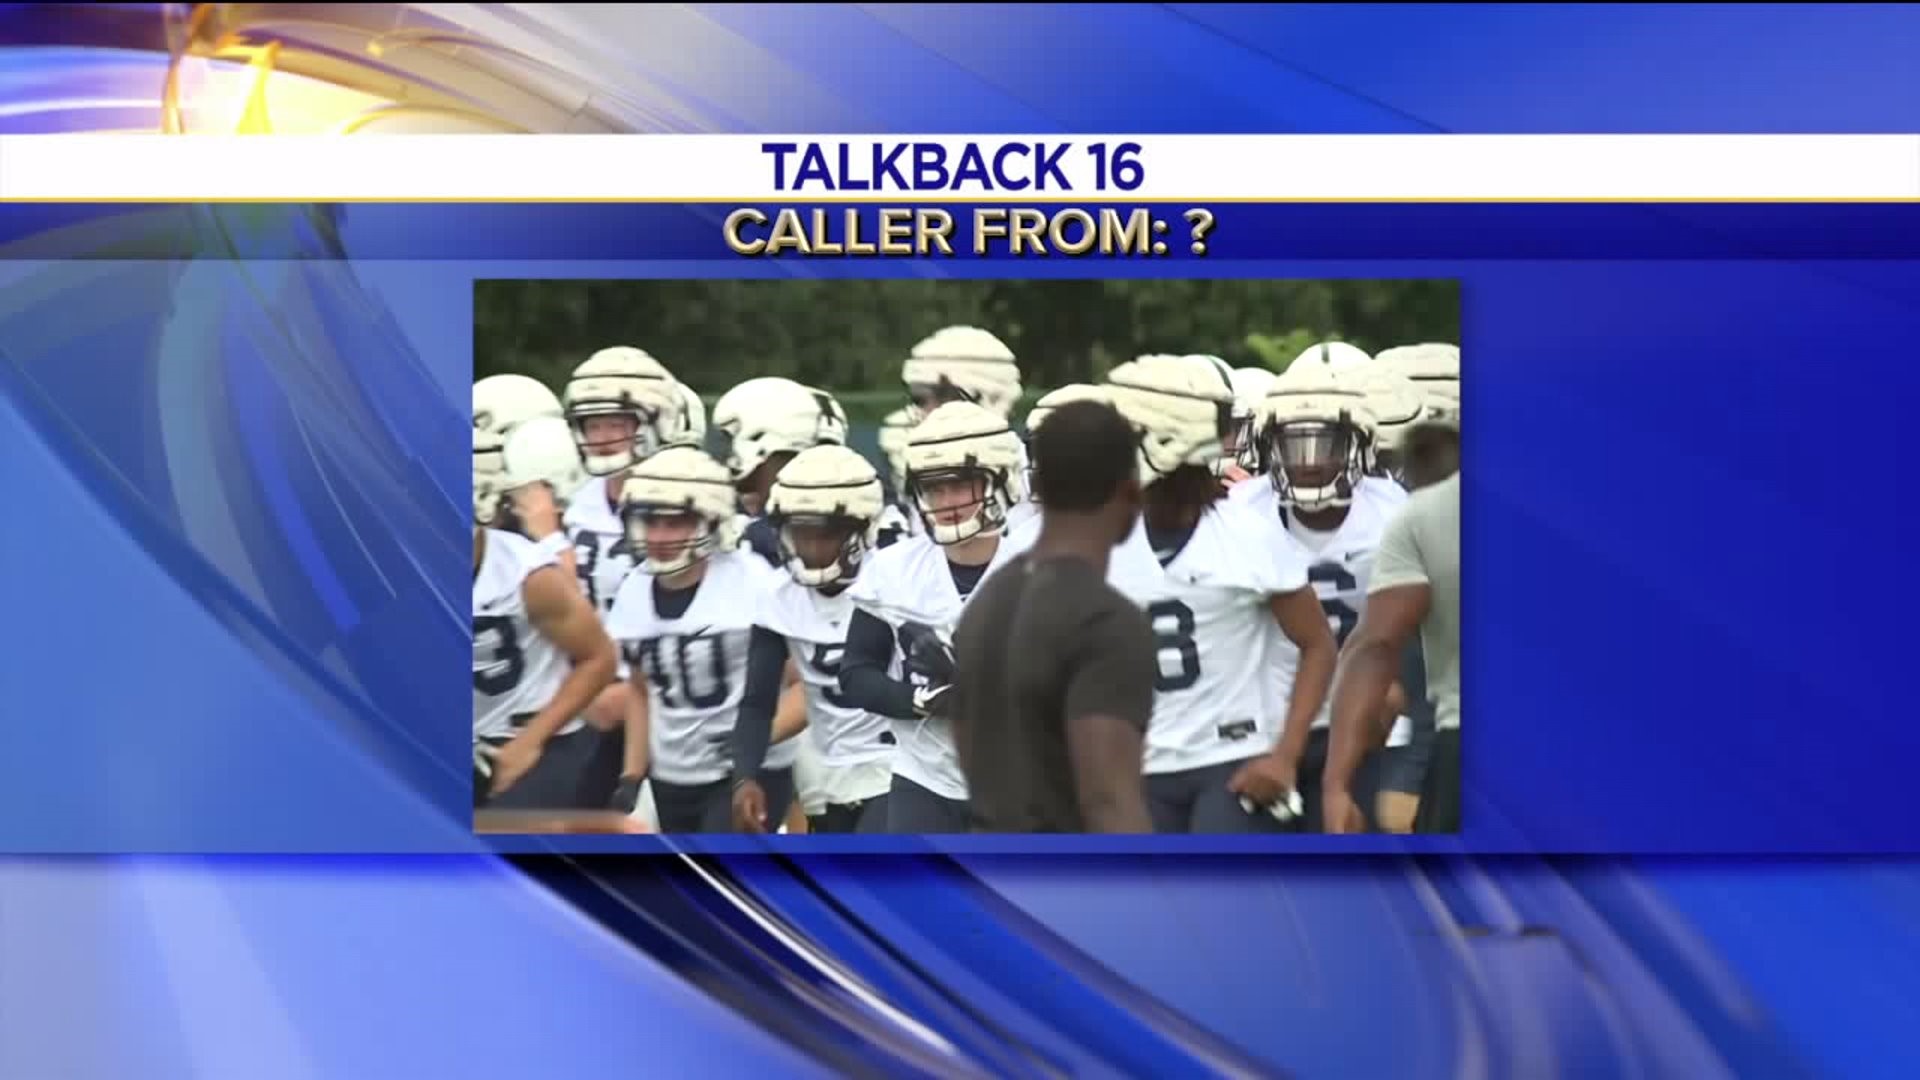 Talkback 16: College Education and College Football